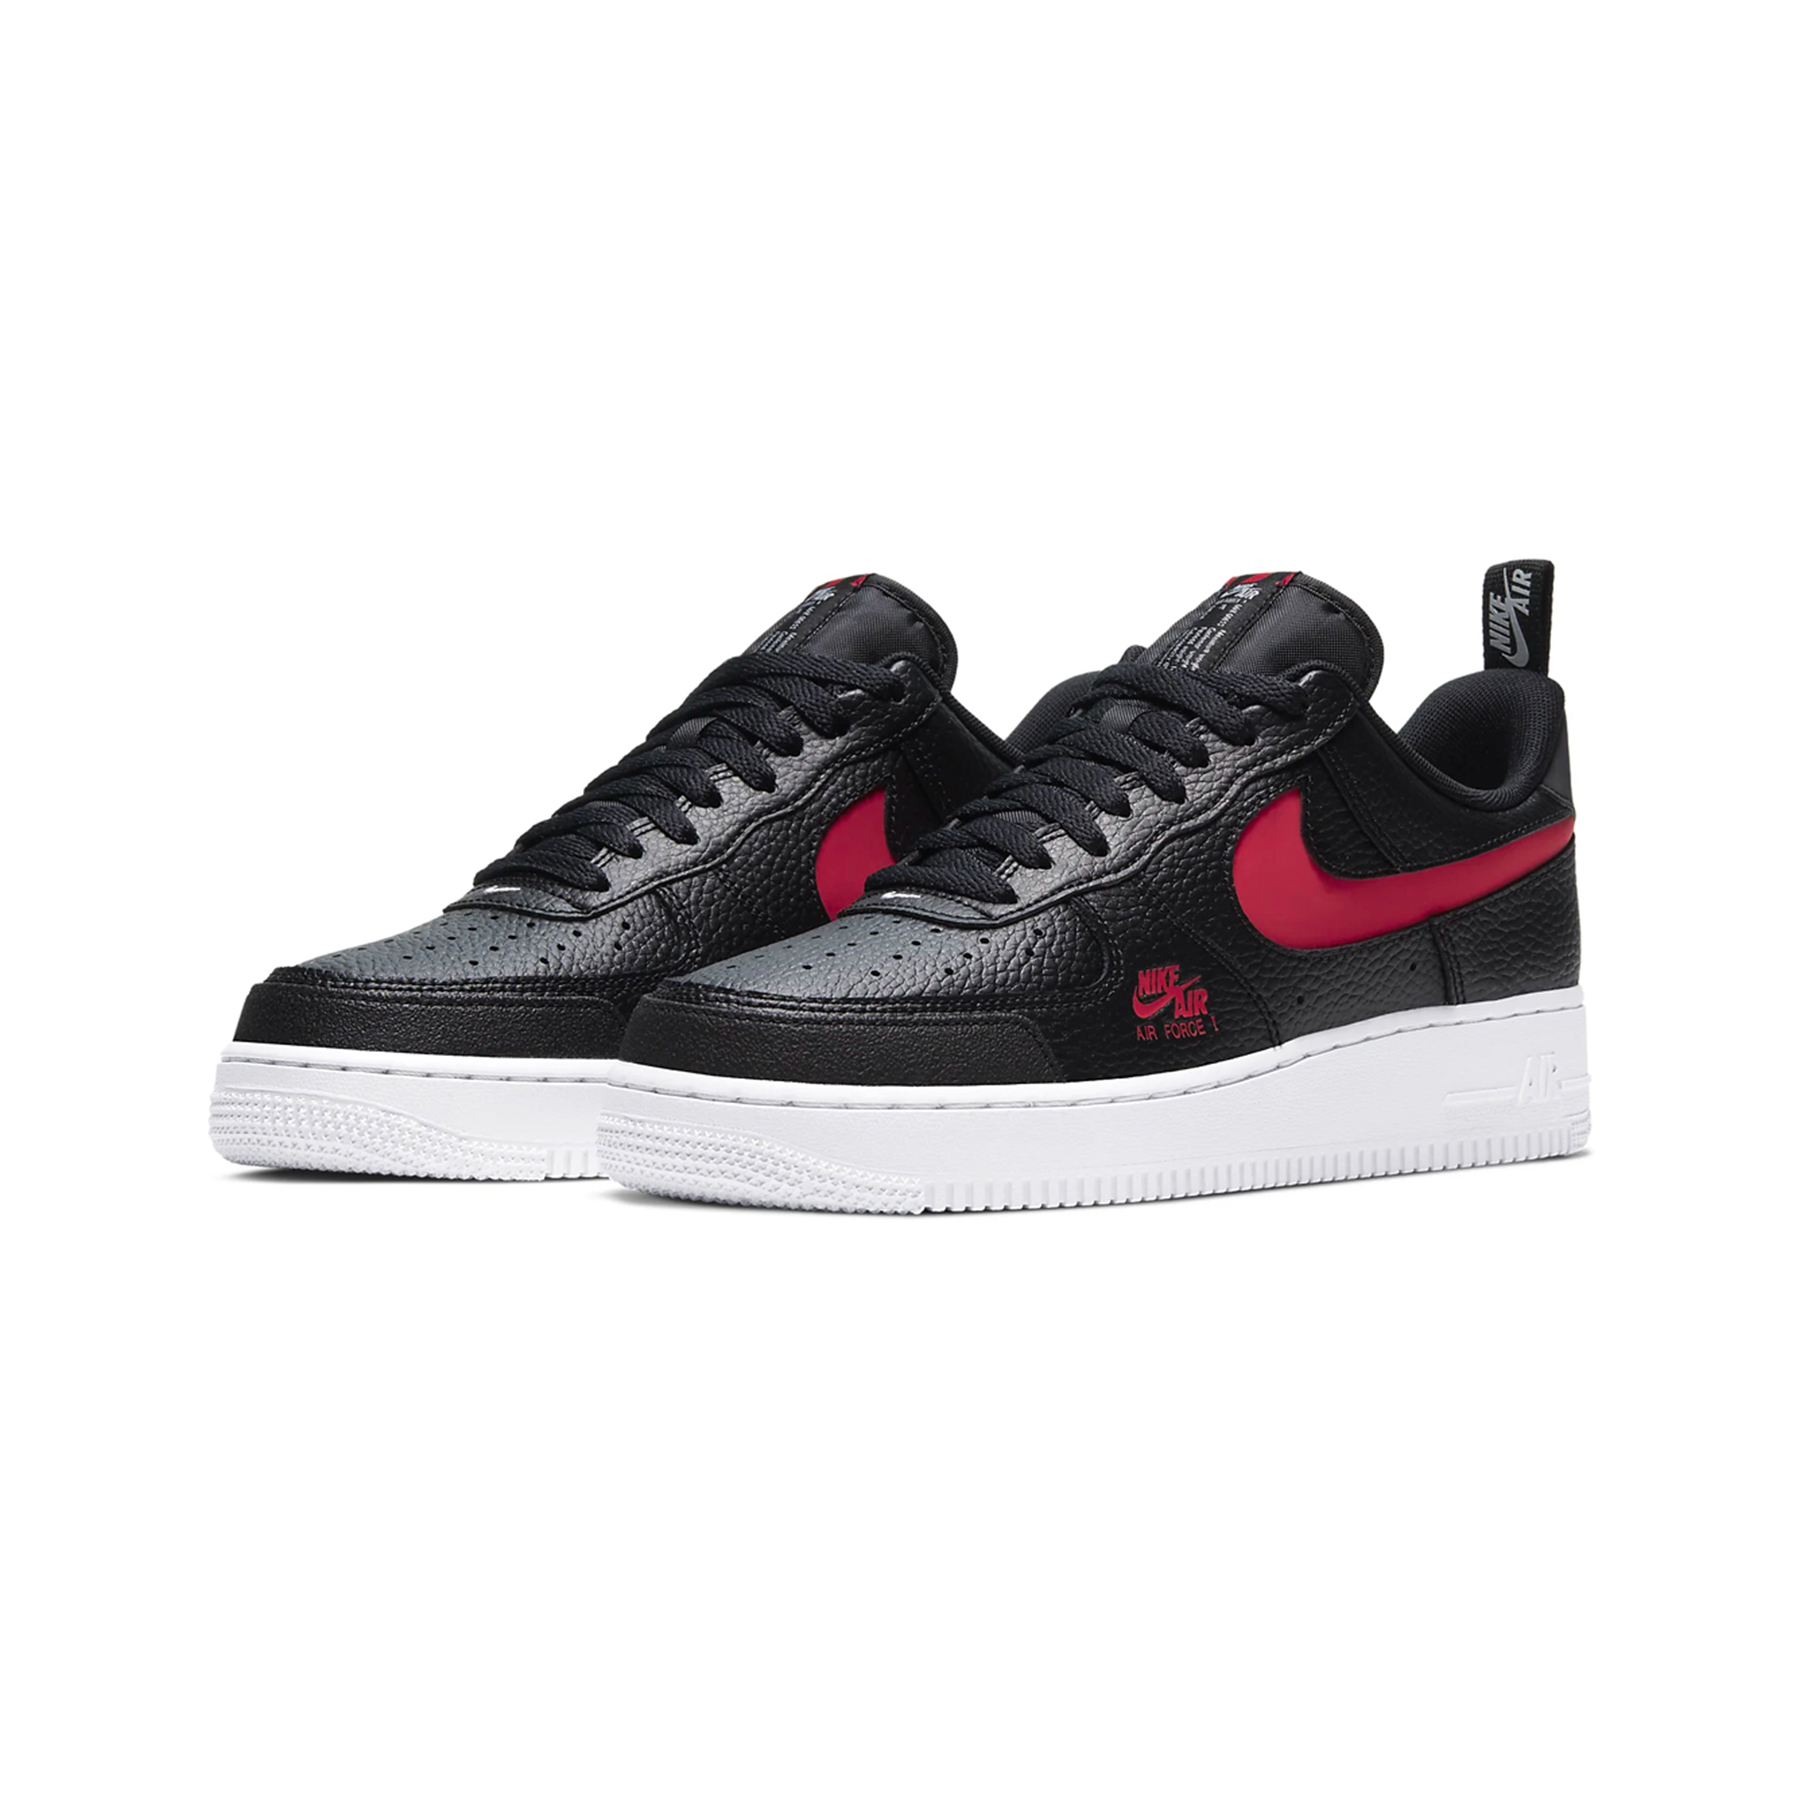 Nike Air Force 1 LV8 Utility Black/Red, Drops